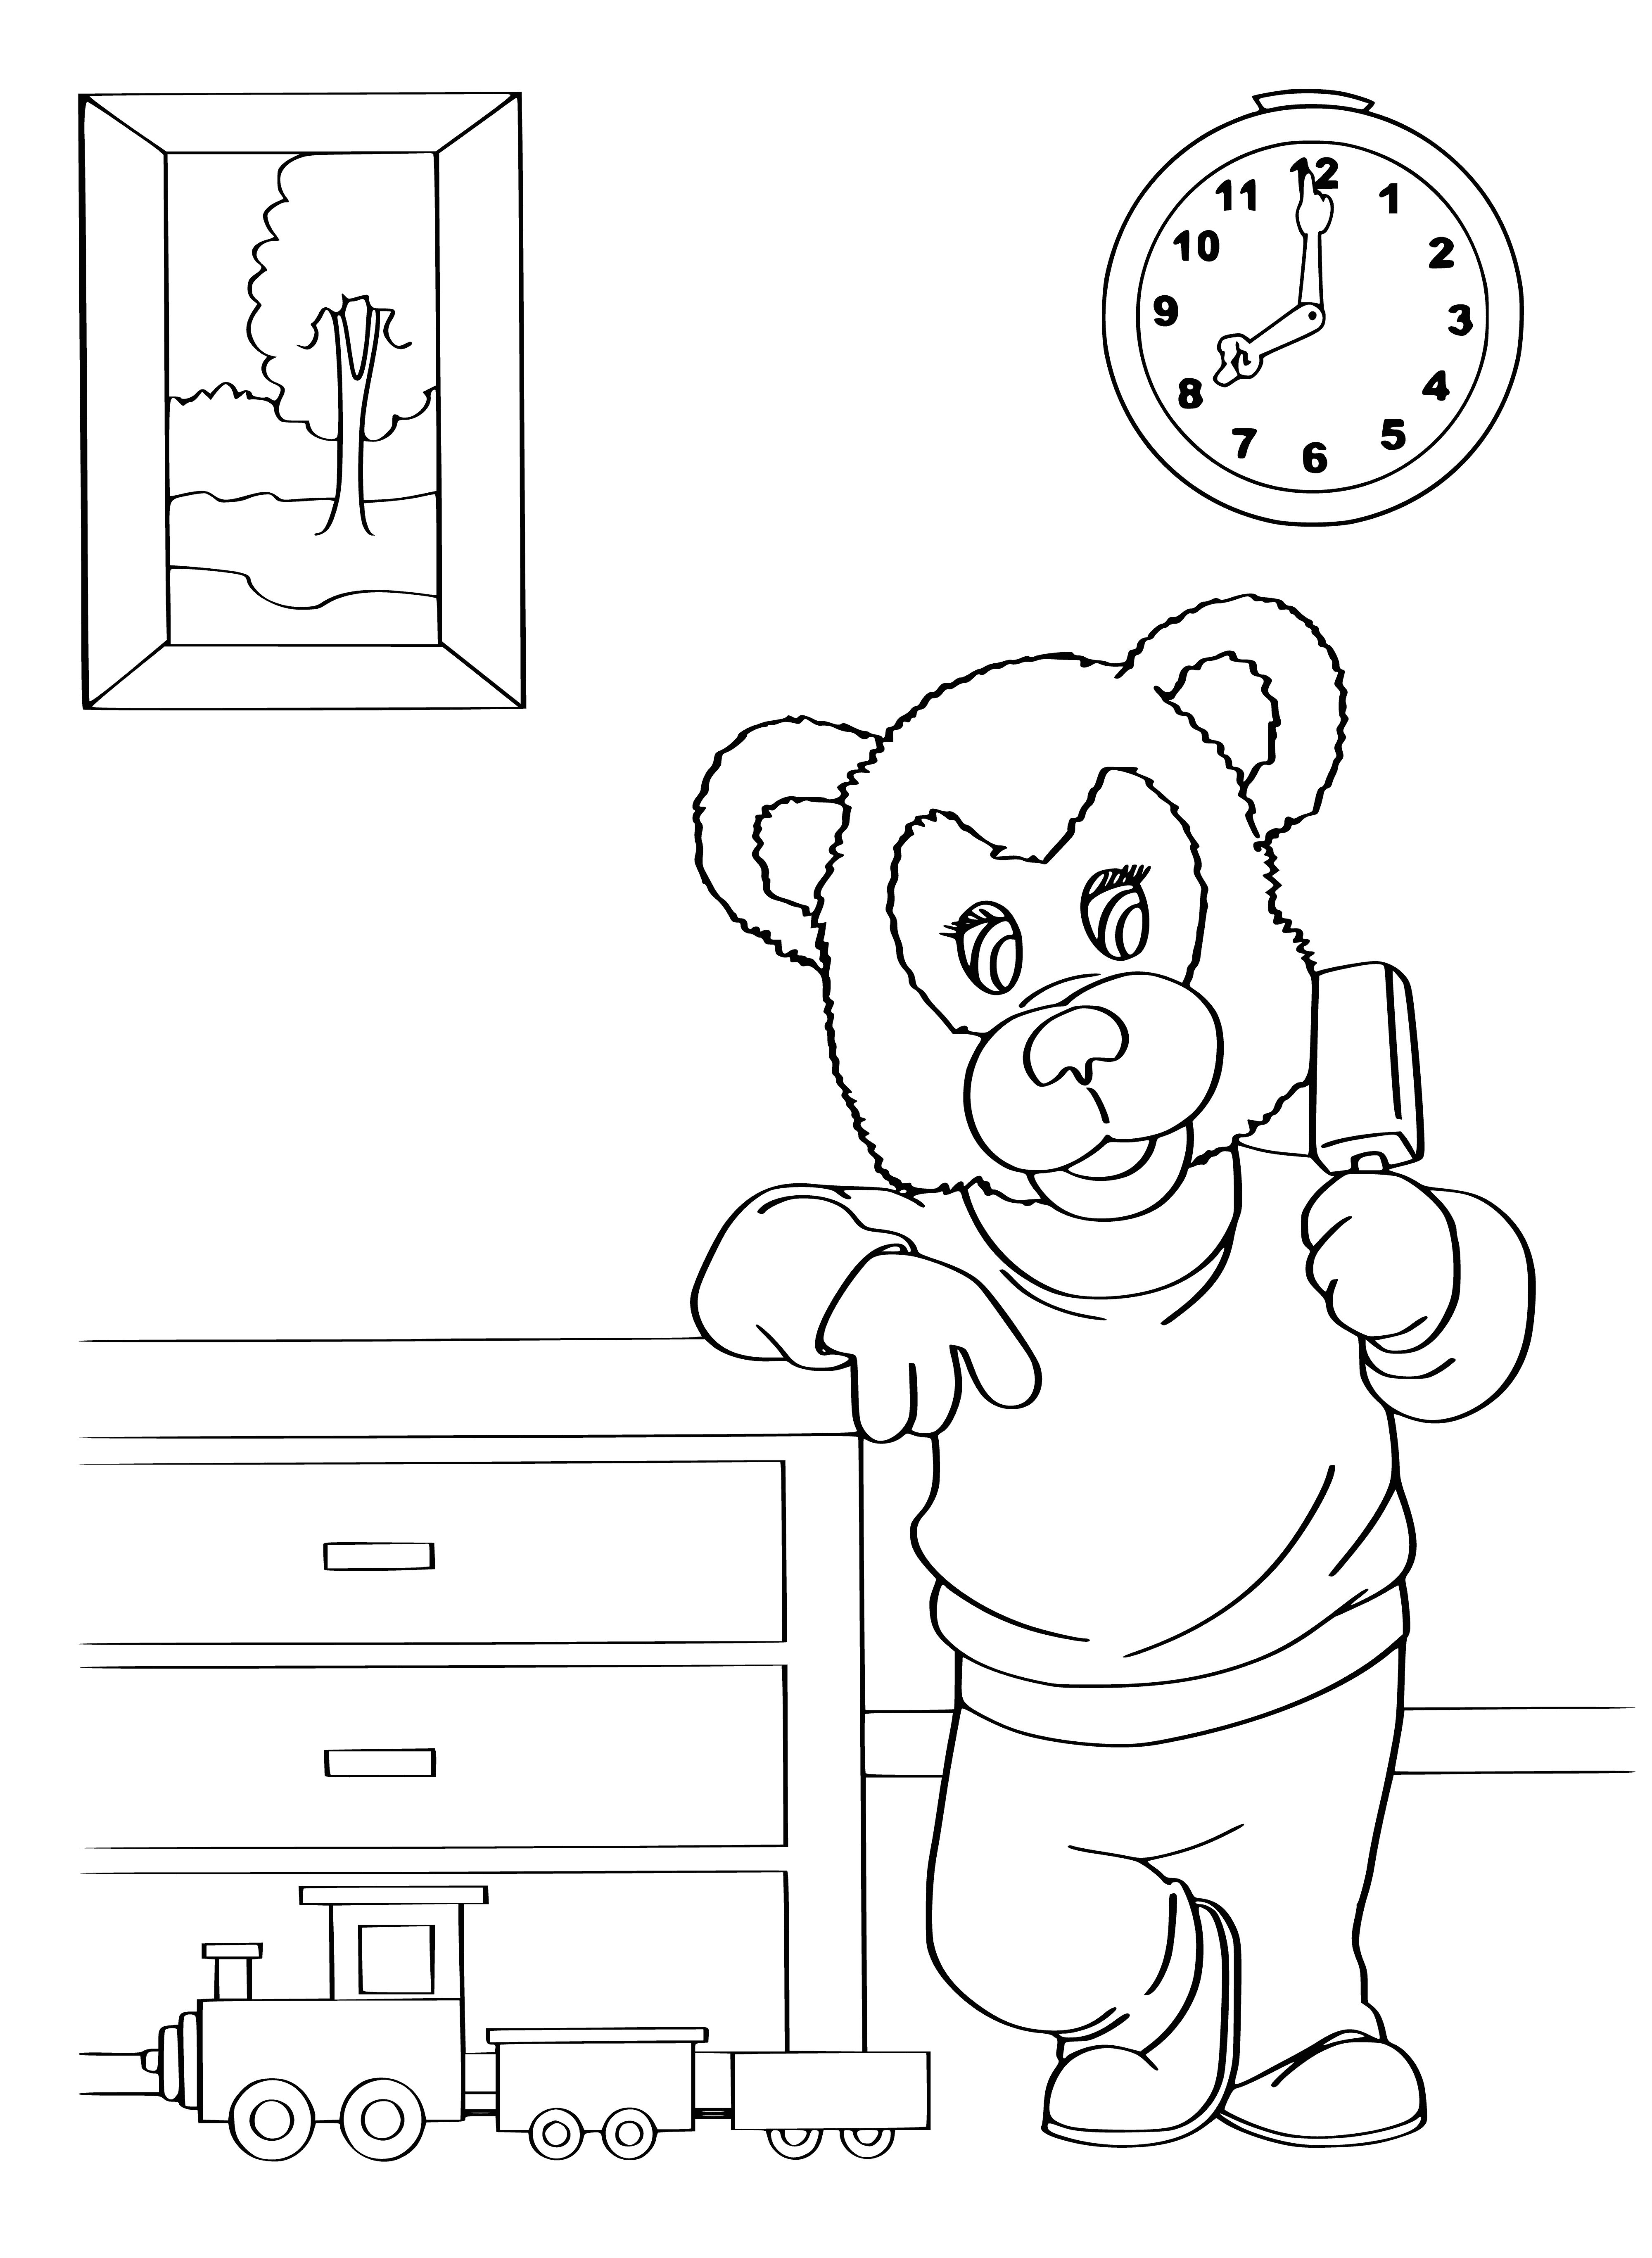 coloring page: A cartoon character, Mishutka, standing on a hill with a big full moon behind her & waving goodbye. Houses, trees & hills in background; clear night sky with stars.